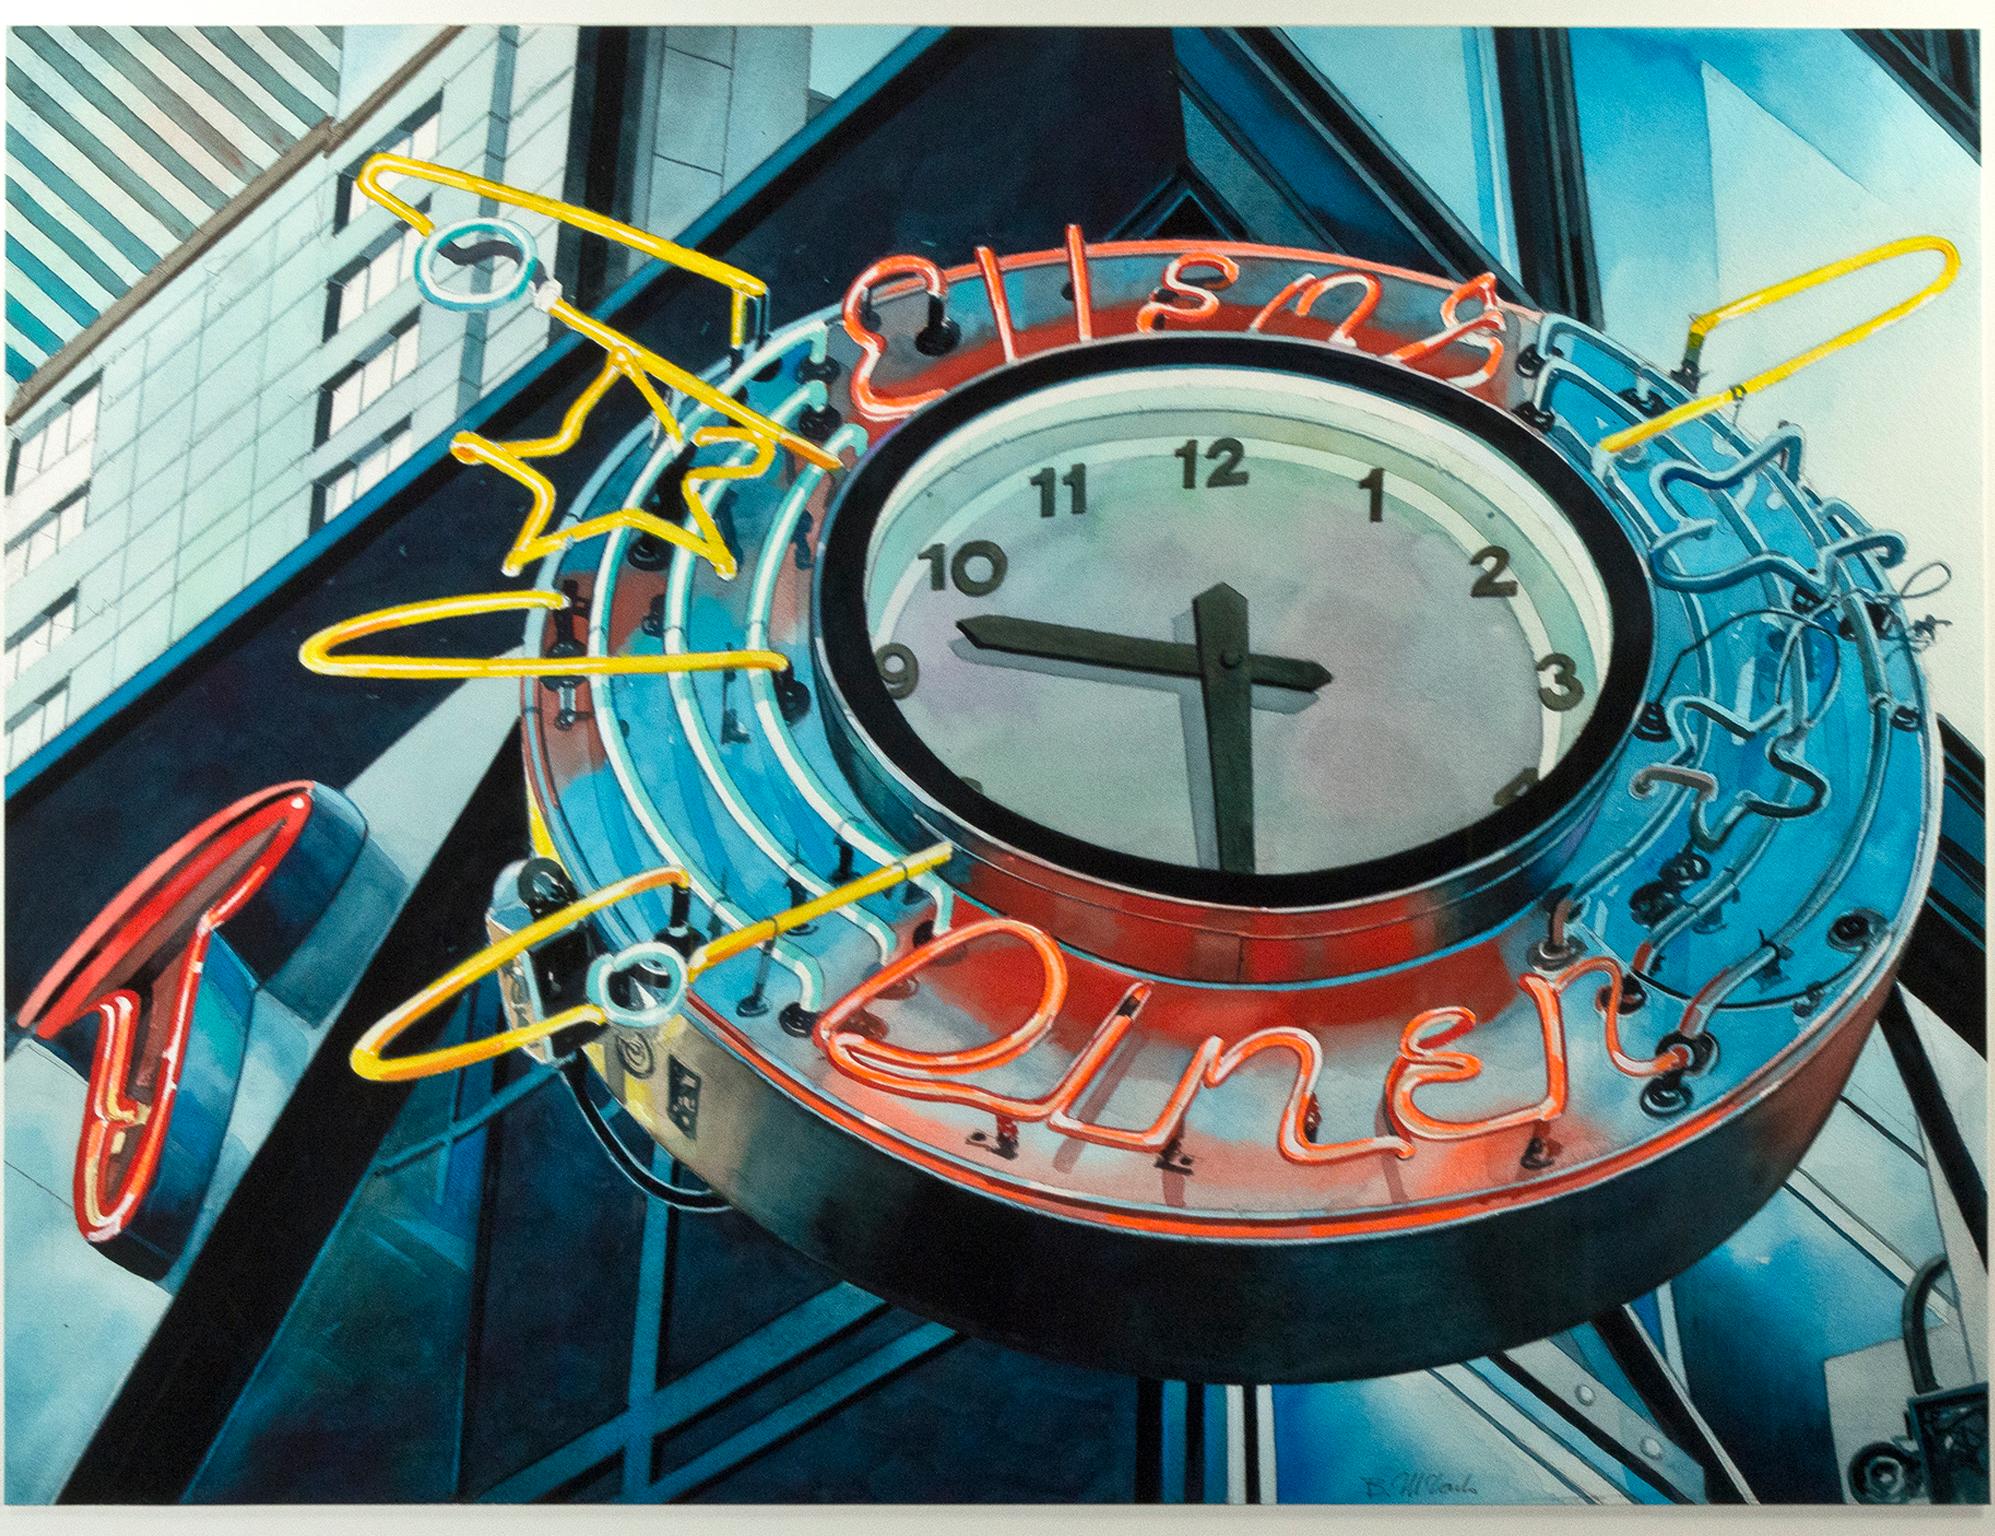 "Ellen's Diner, NYC" is an original photorealist watercolor painting by Bruce McCombs. The artist signed the piece lower right. This piece features a city diner's neon sign and clock. 

22" x 29 1/2" art
25" x 32 1/2" frame

Bruce McCombs has a way